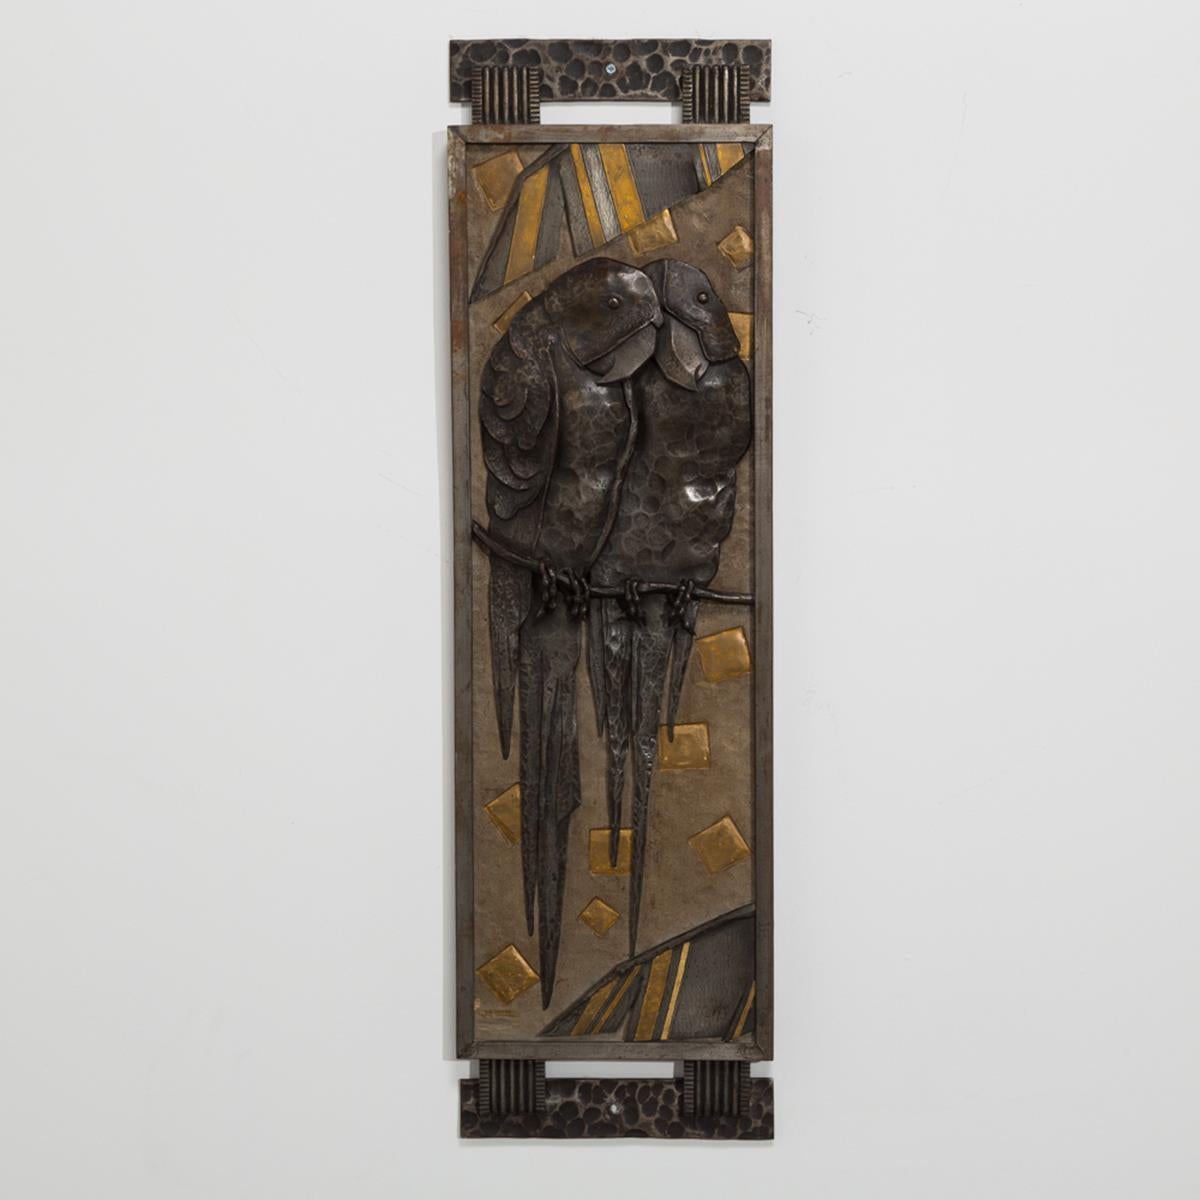 Exceptional mirror with sculpted and patinated steel parrot relief scene by Michel Zadounaisky, circa 1930 signed. 

Michel Zadounaisky (1903-1983) trained at the Beaux Arts of Lyon, France. His work includes entry grid in the Treasury Room of the